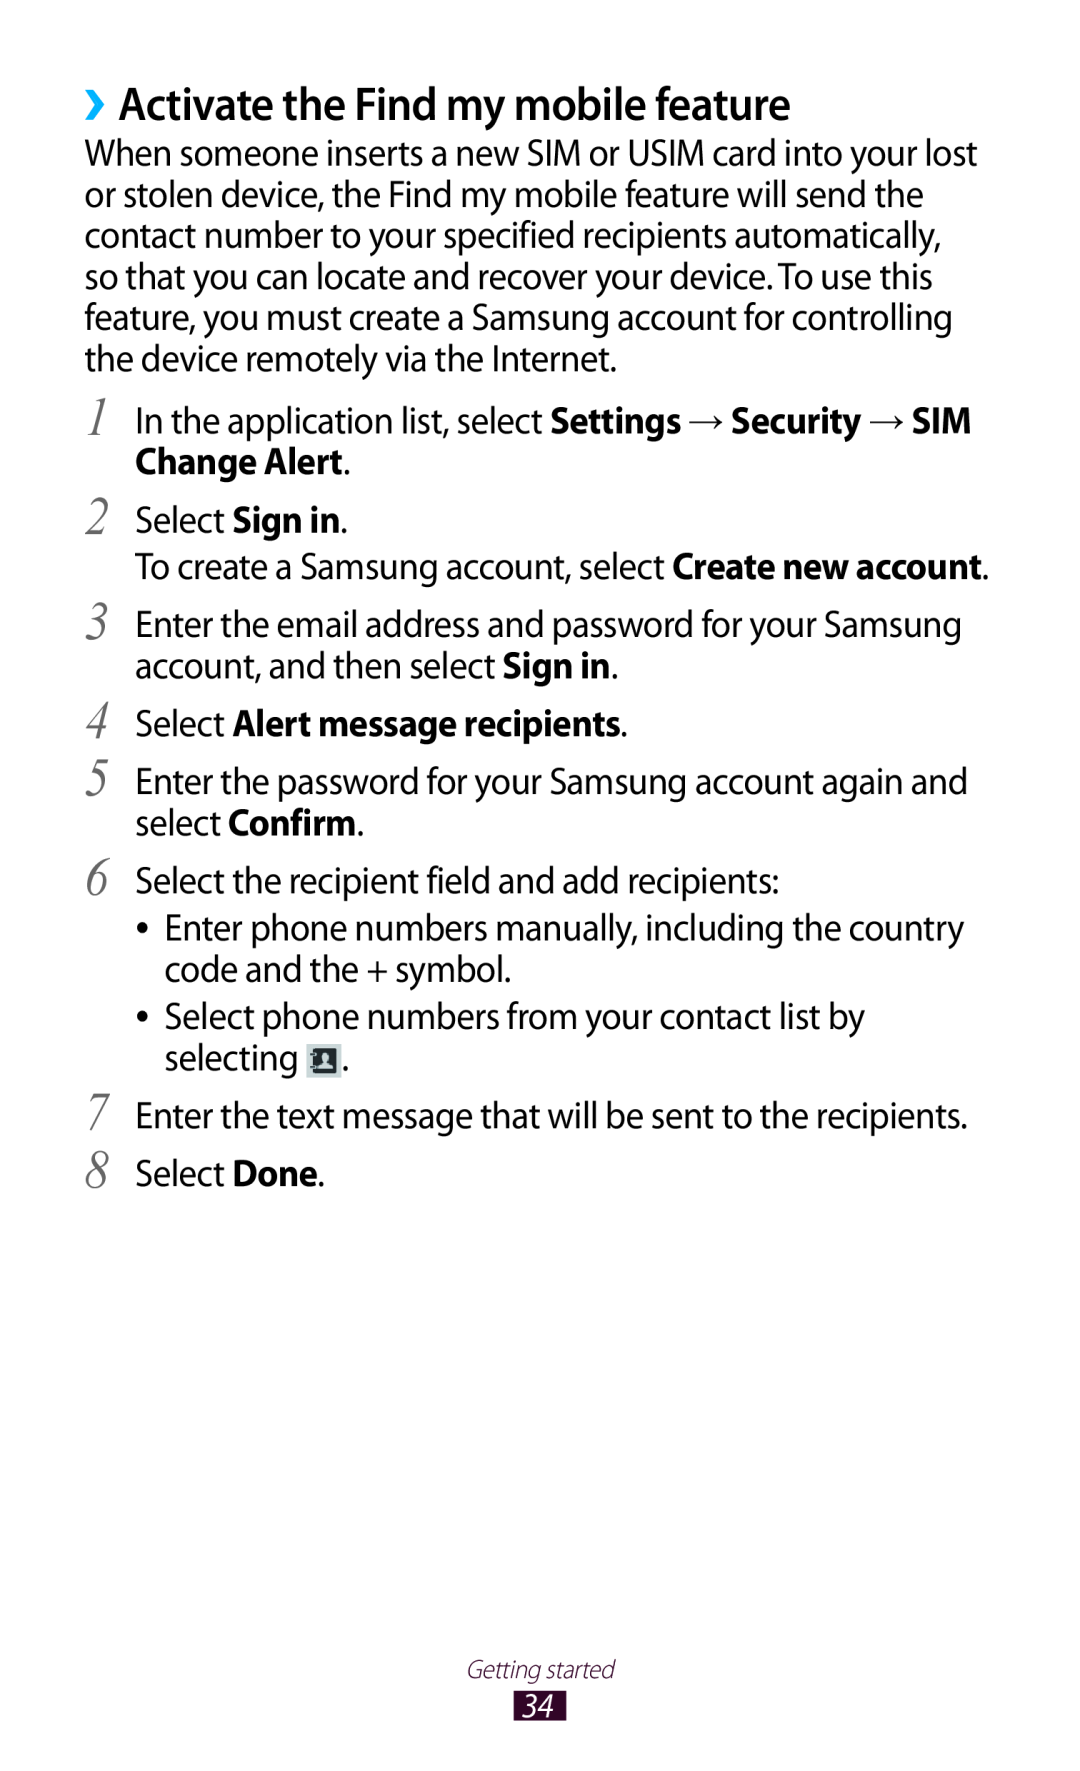 Samsung GT-P7500UWDWIN manual ››Activate the Find my mobile feature, Change Alert, Select Alert message recipients 